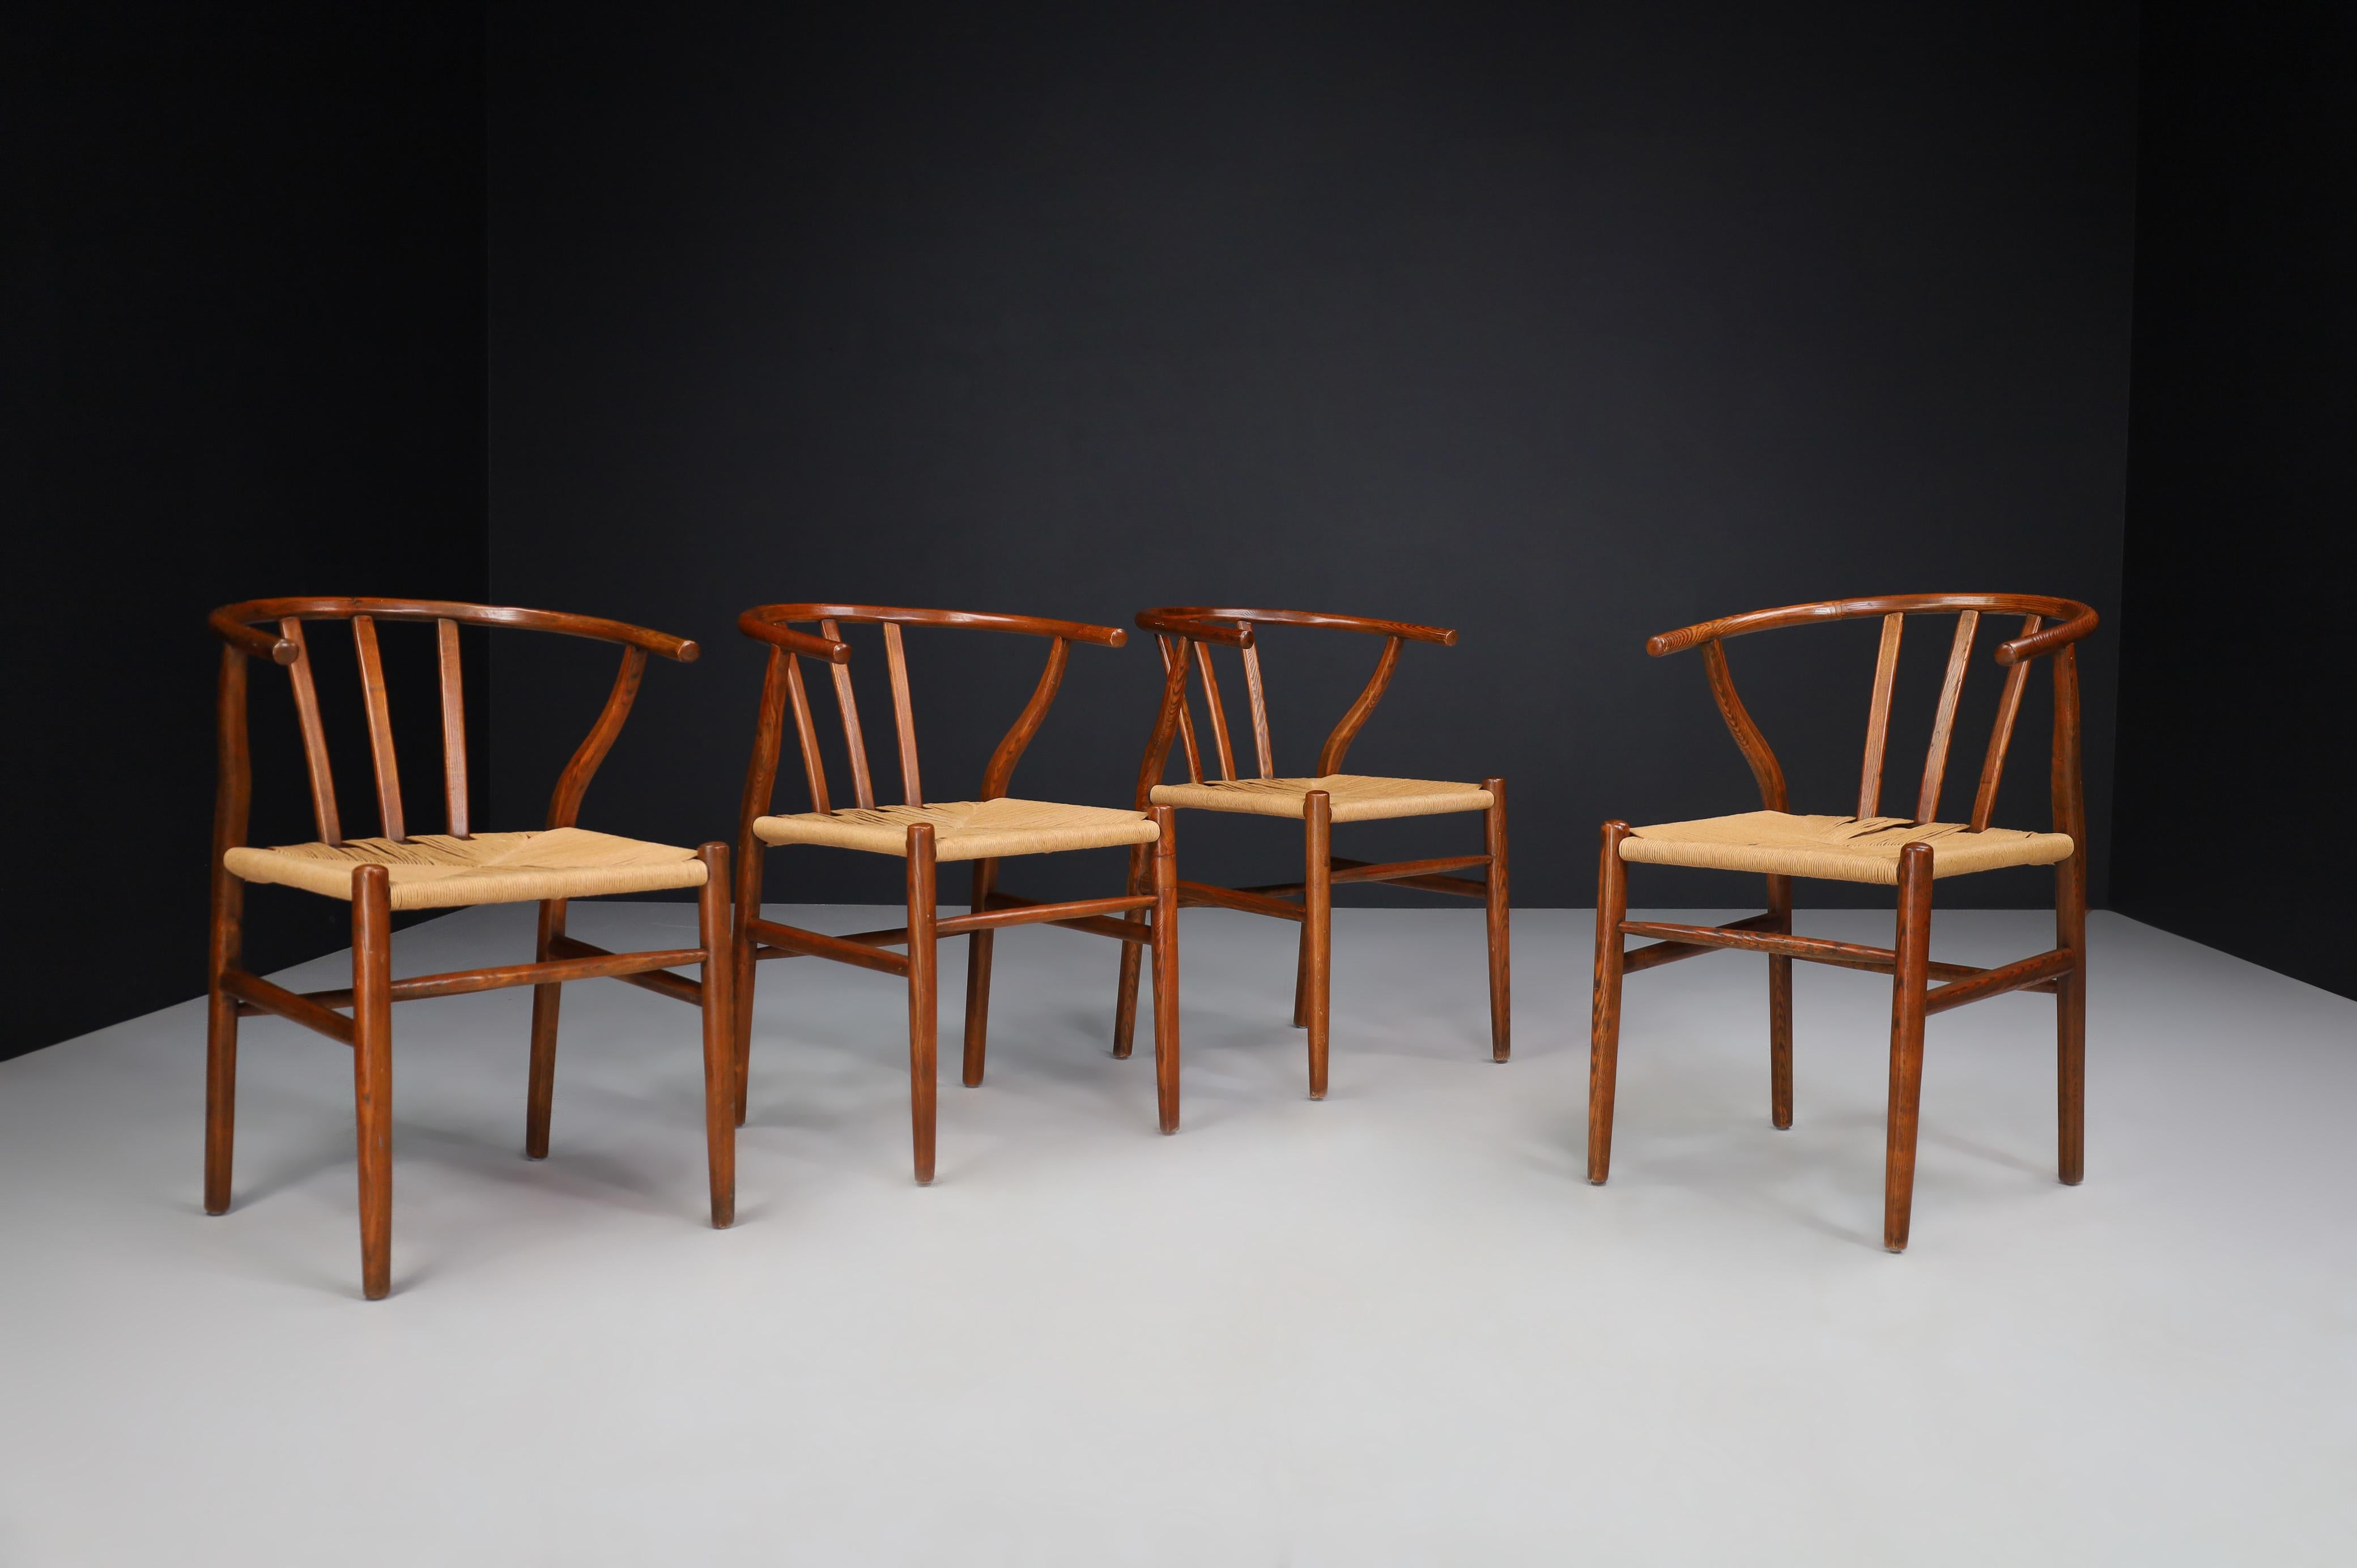 Oak and Papercord Armchairs or Dining Chairs, Denmark 1960s.

These chairs are made of solid oak and handwoven paper cord seats. The chairs are in good vintage condition and can be used as dining or side chairs.  These chairs would be an